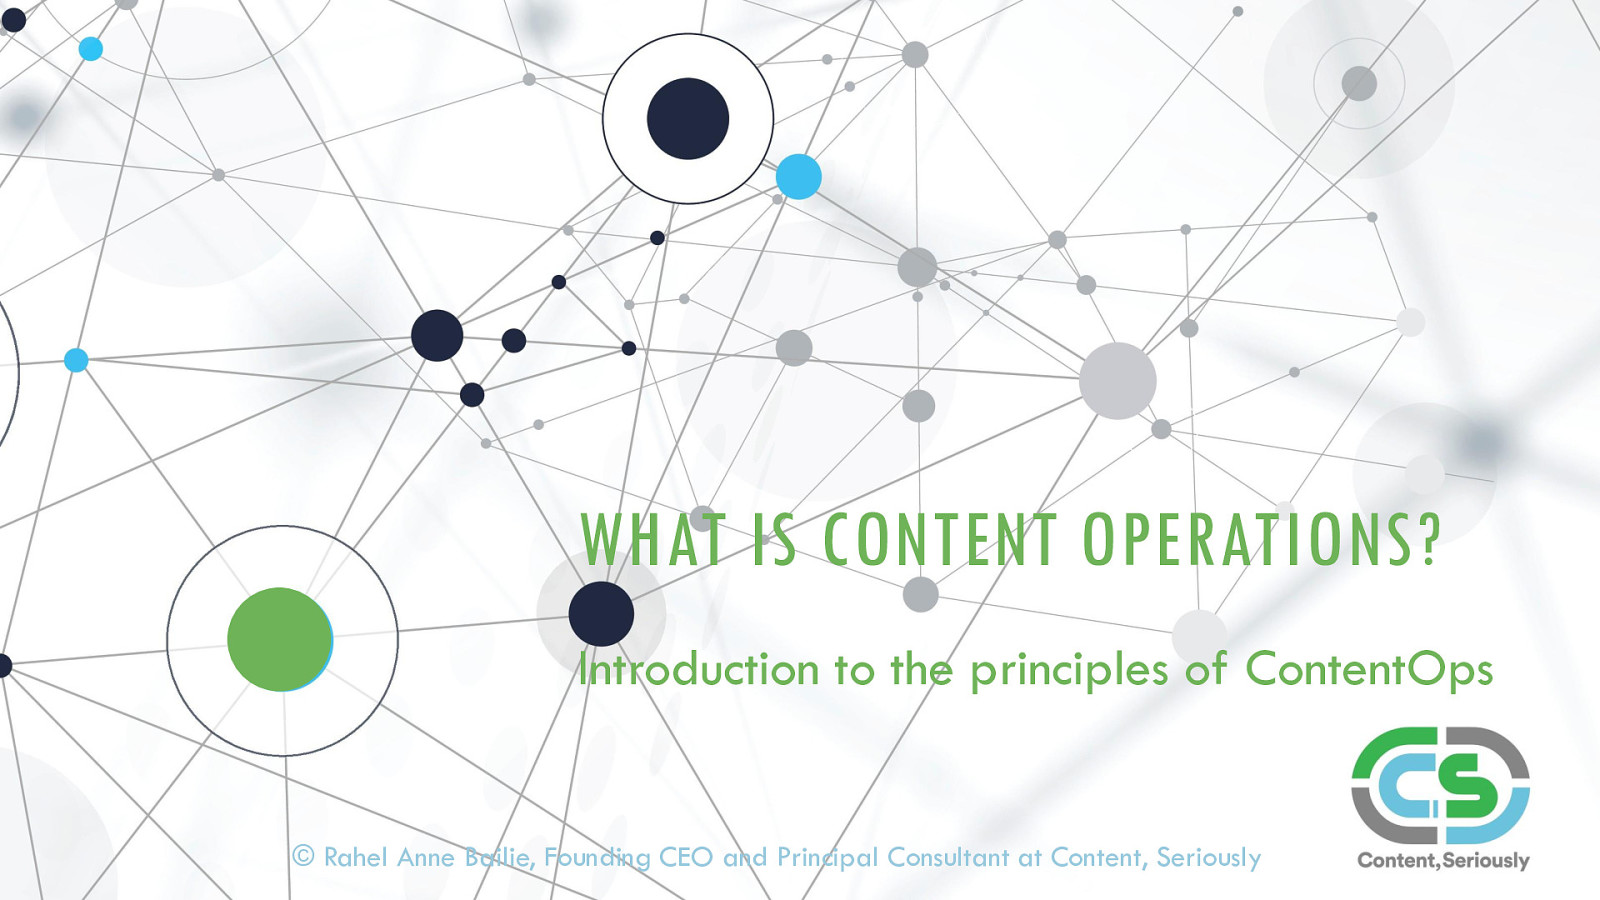 WHAT IS CONTENT OPERATIONS?